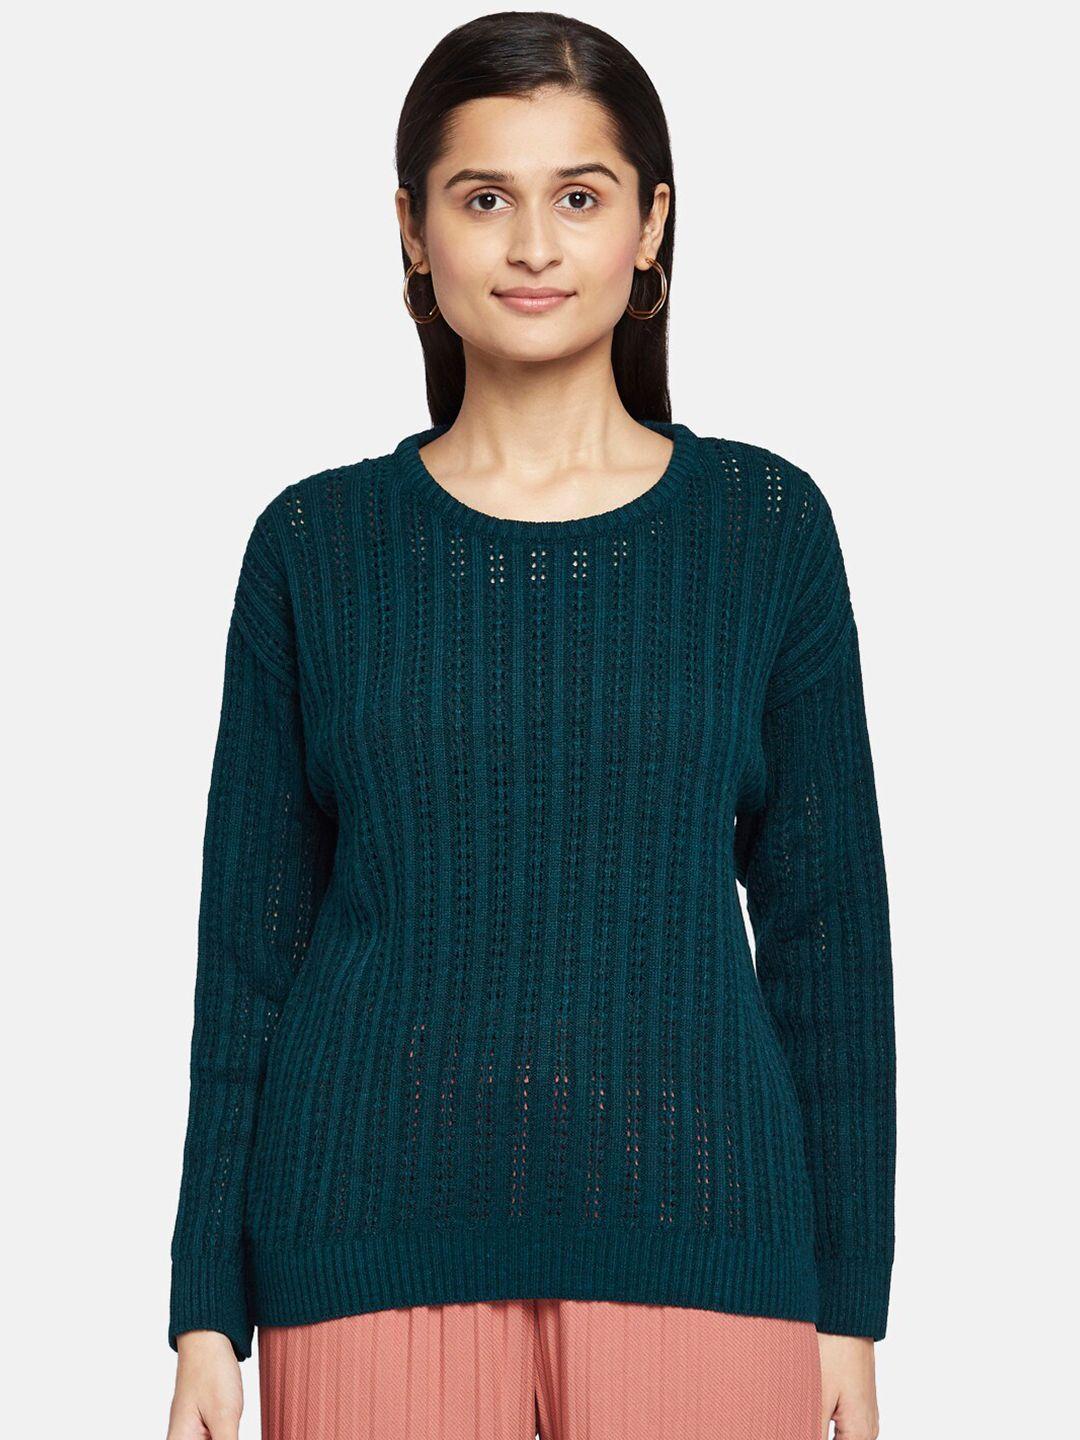 honey by pantaloons women teal green acrylic pullover